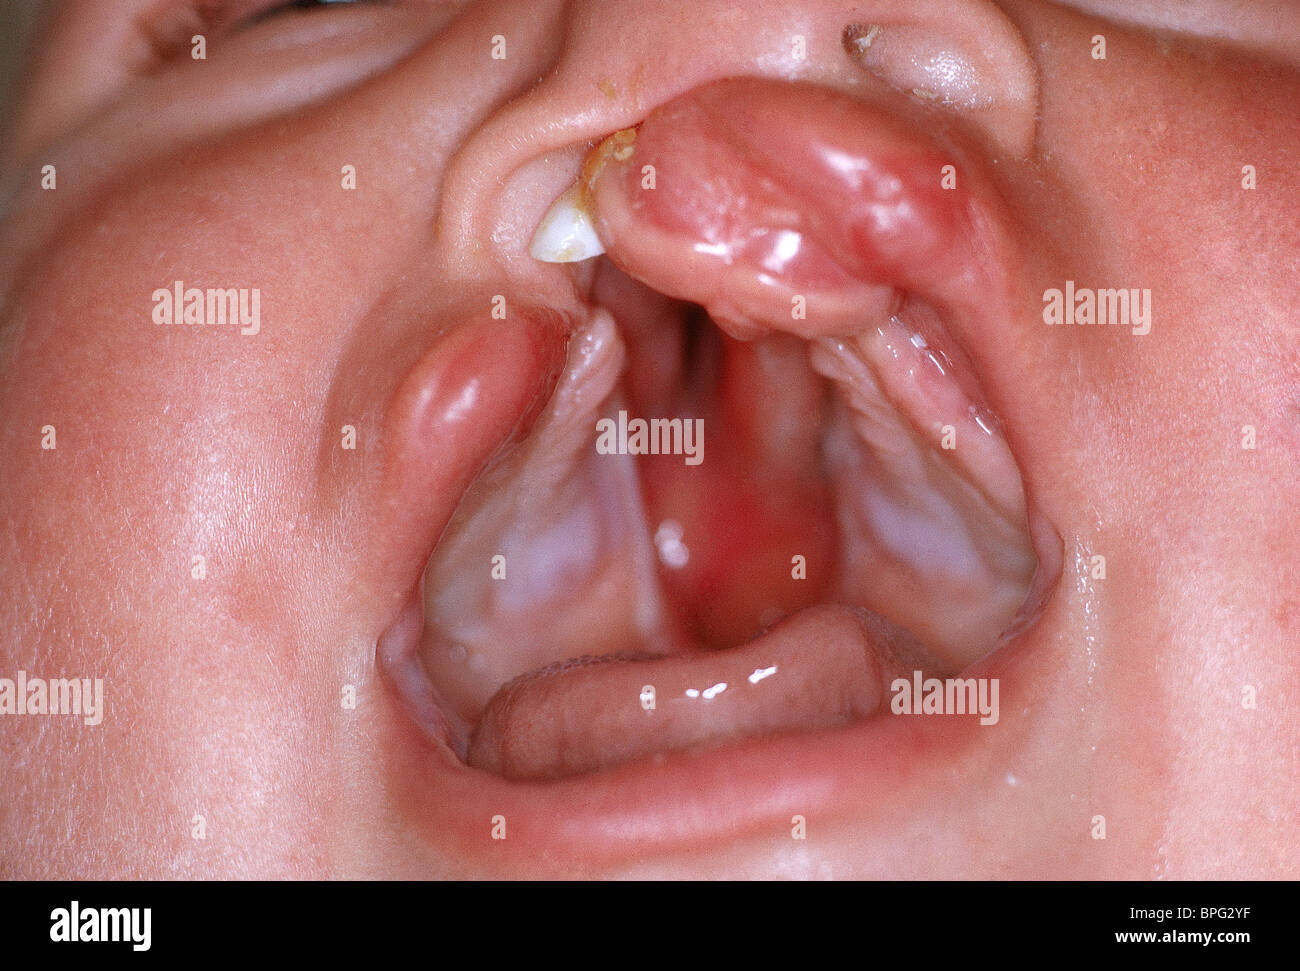 This is a congenital deformity caused by abnormal facial development during gestation. Stock Photo